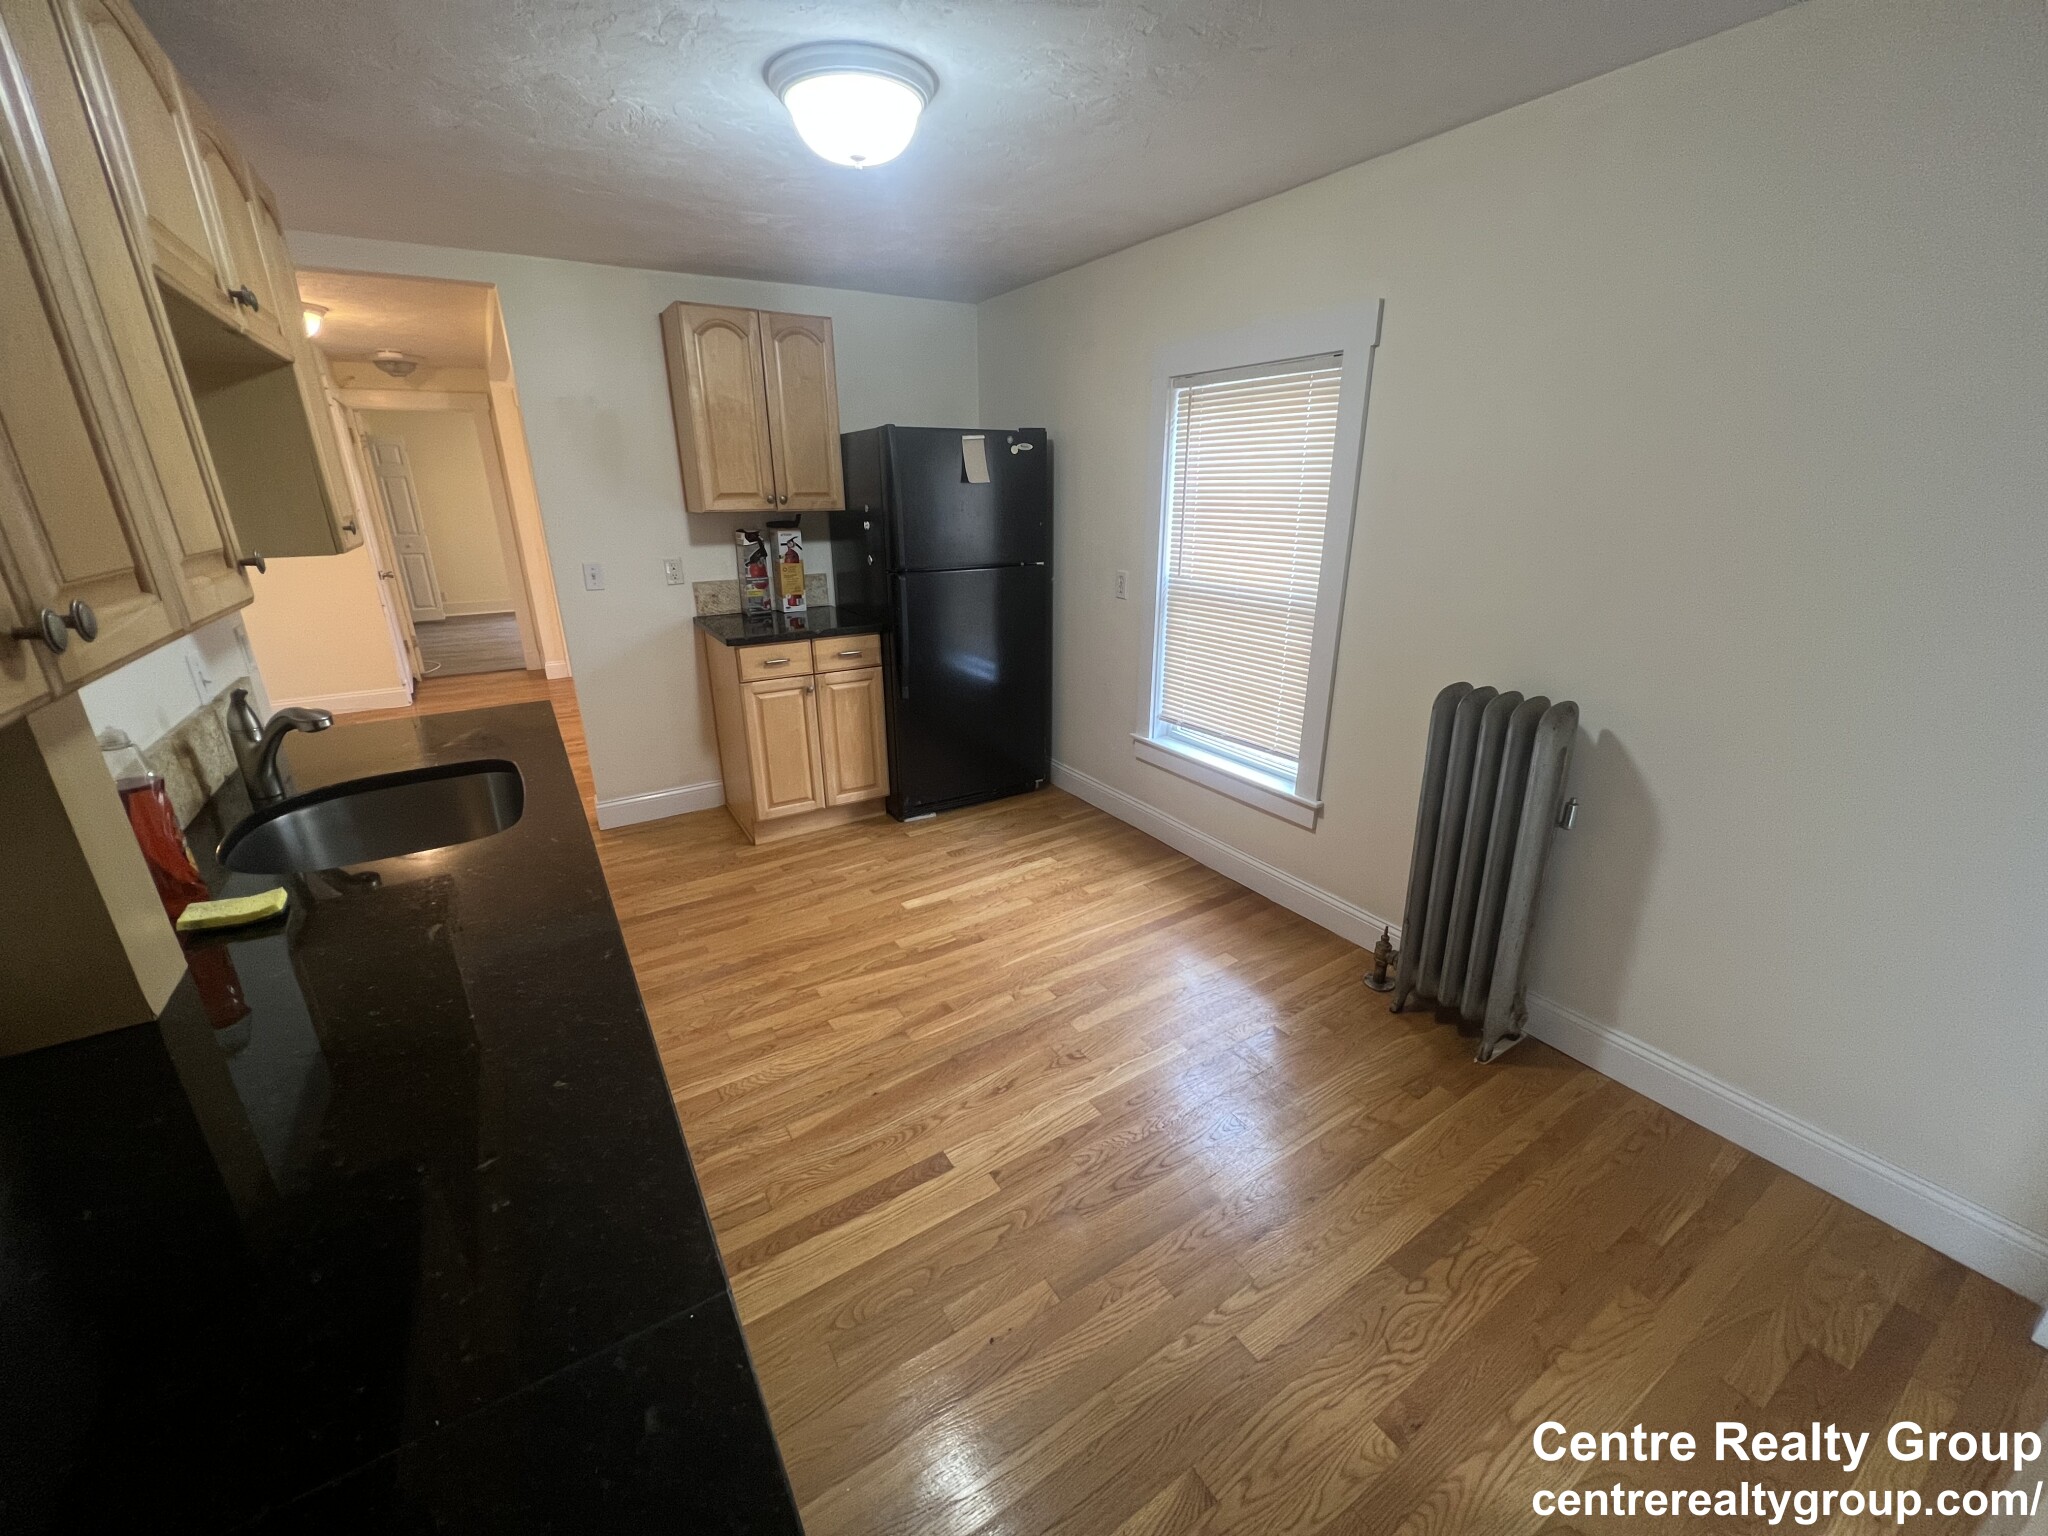 Photos of apartment on Charles,Waltham MA 02453